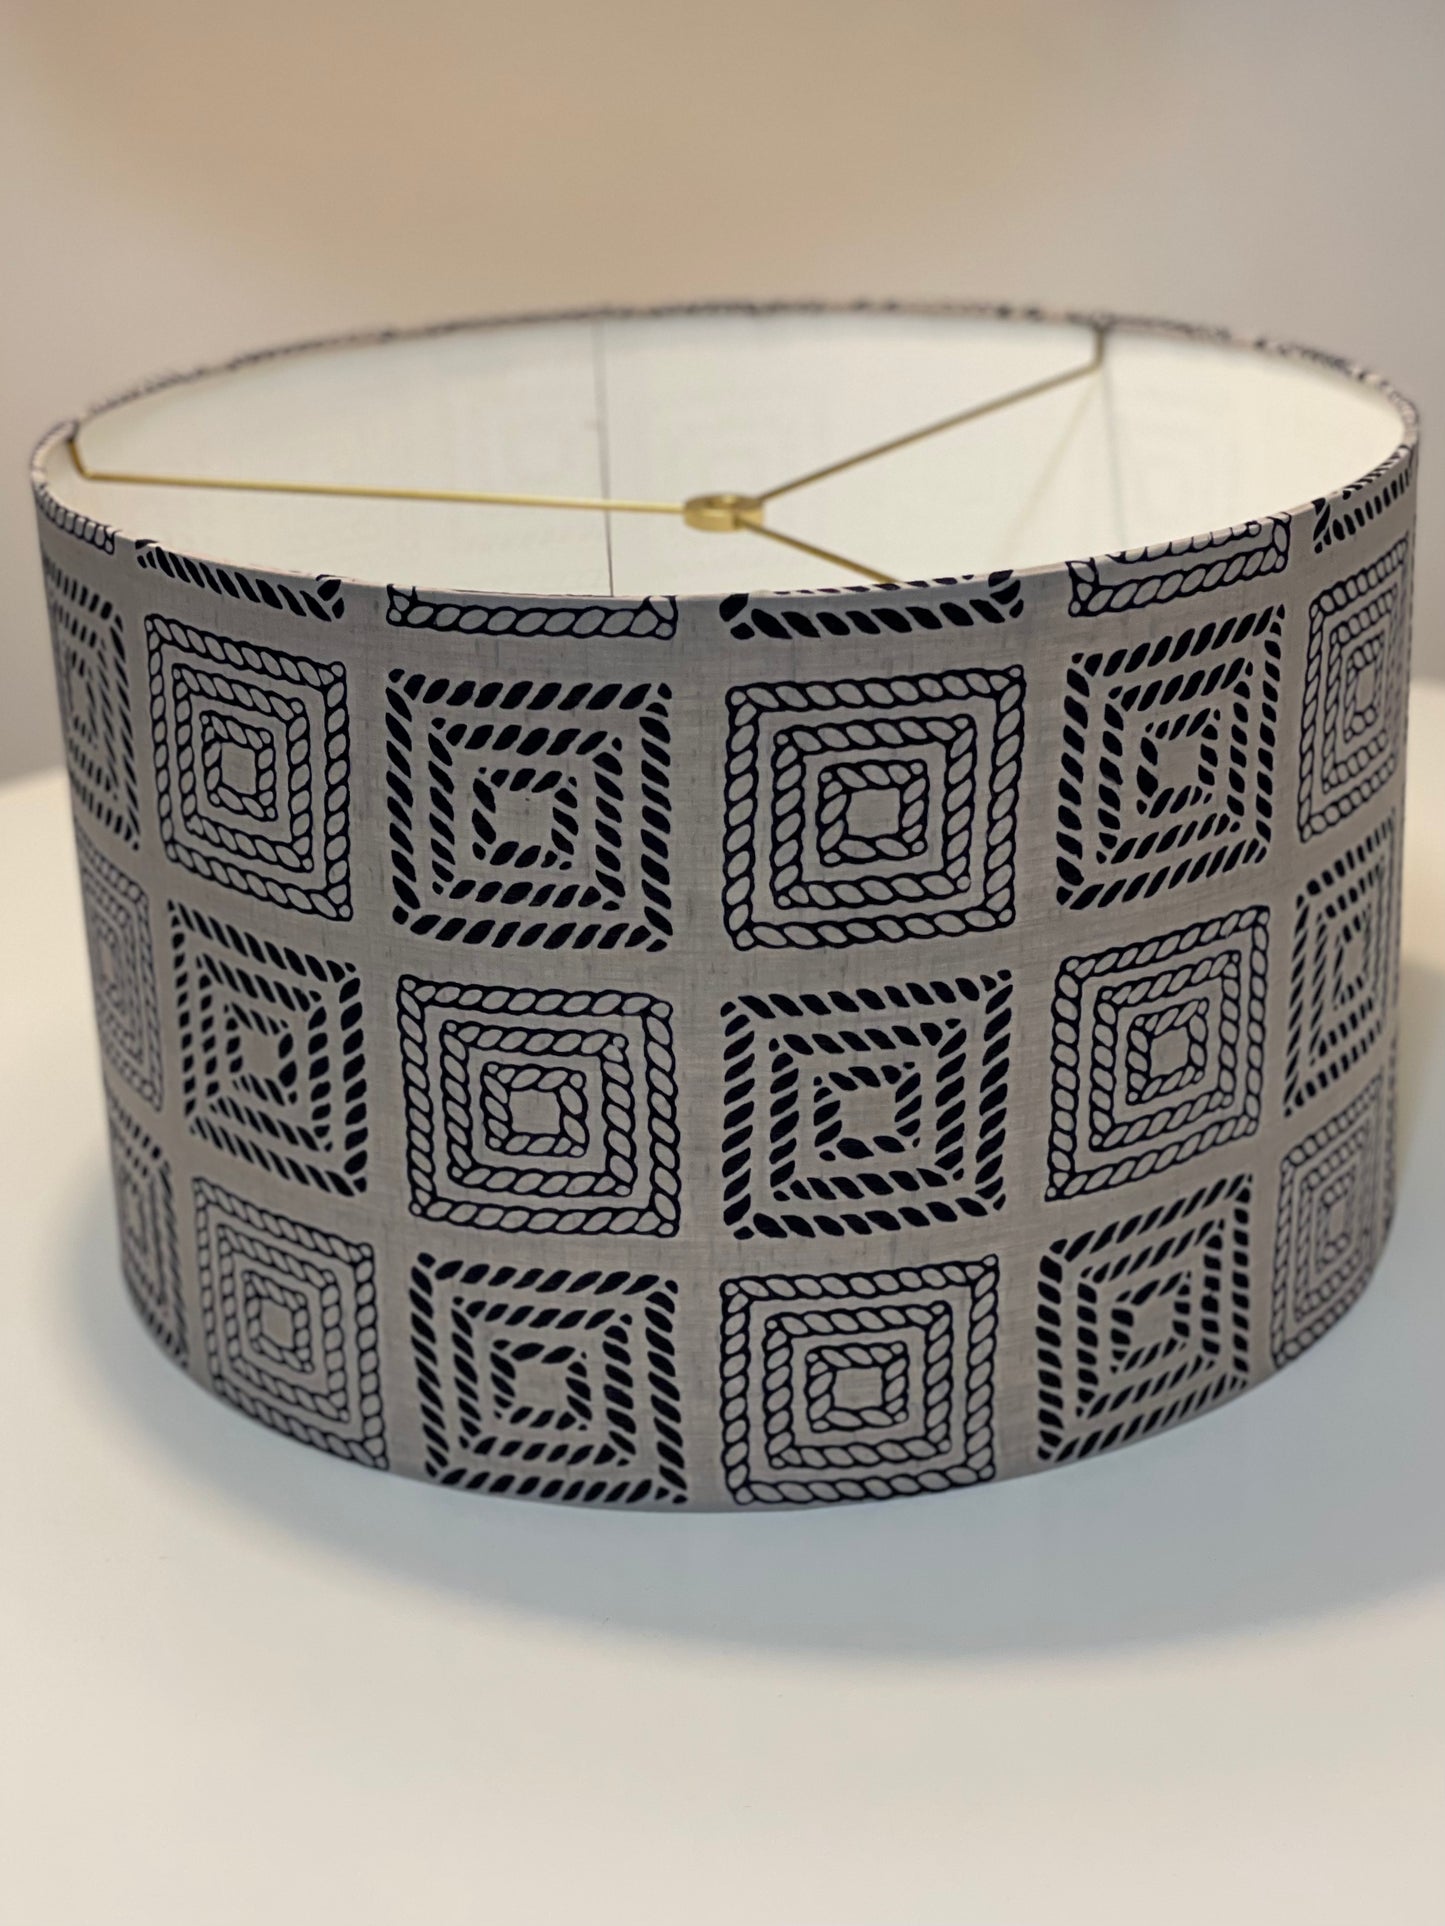 16 Inch Drum Lampshade. Vintage Summer Kimono Fabric from Japan. Smokey Gray and Black Braided Cord Motif.